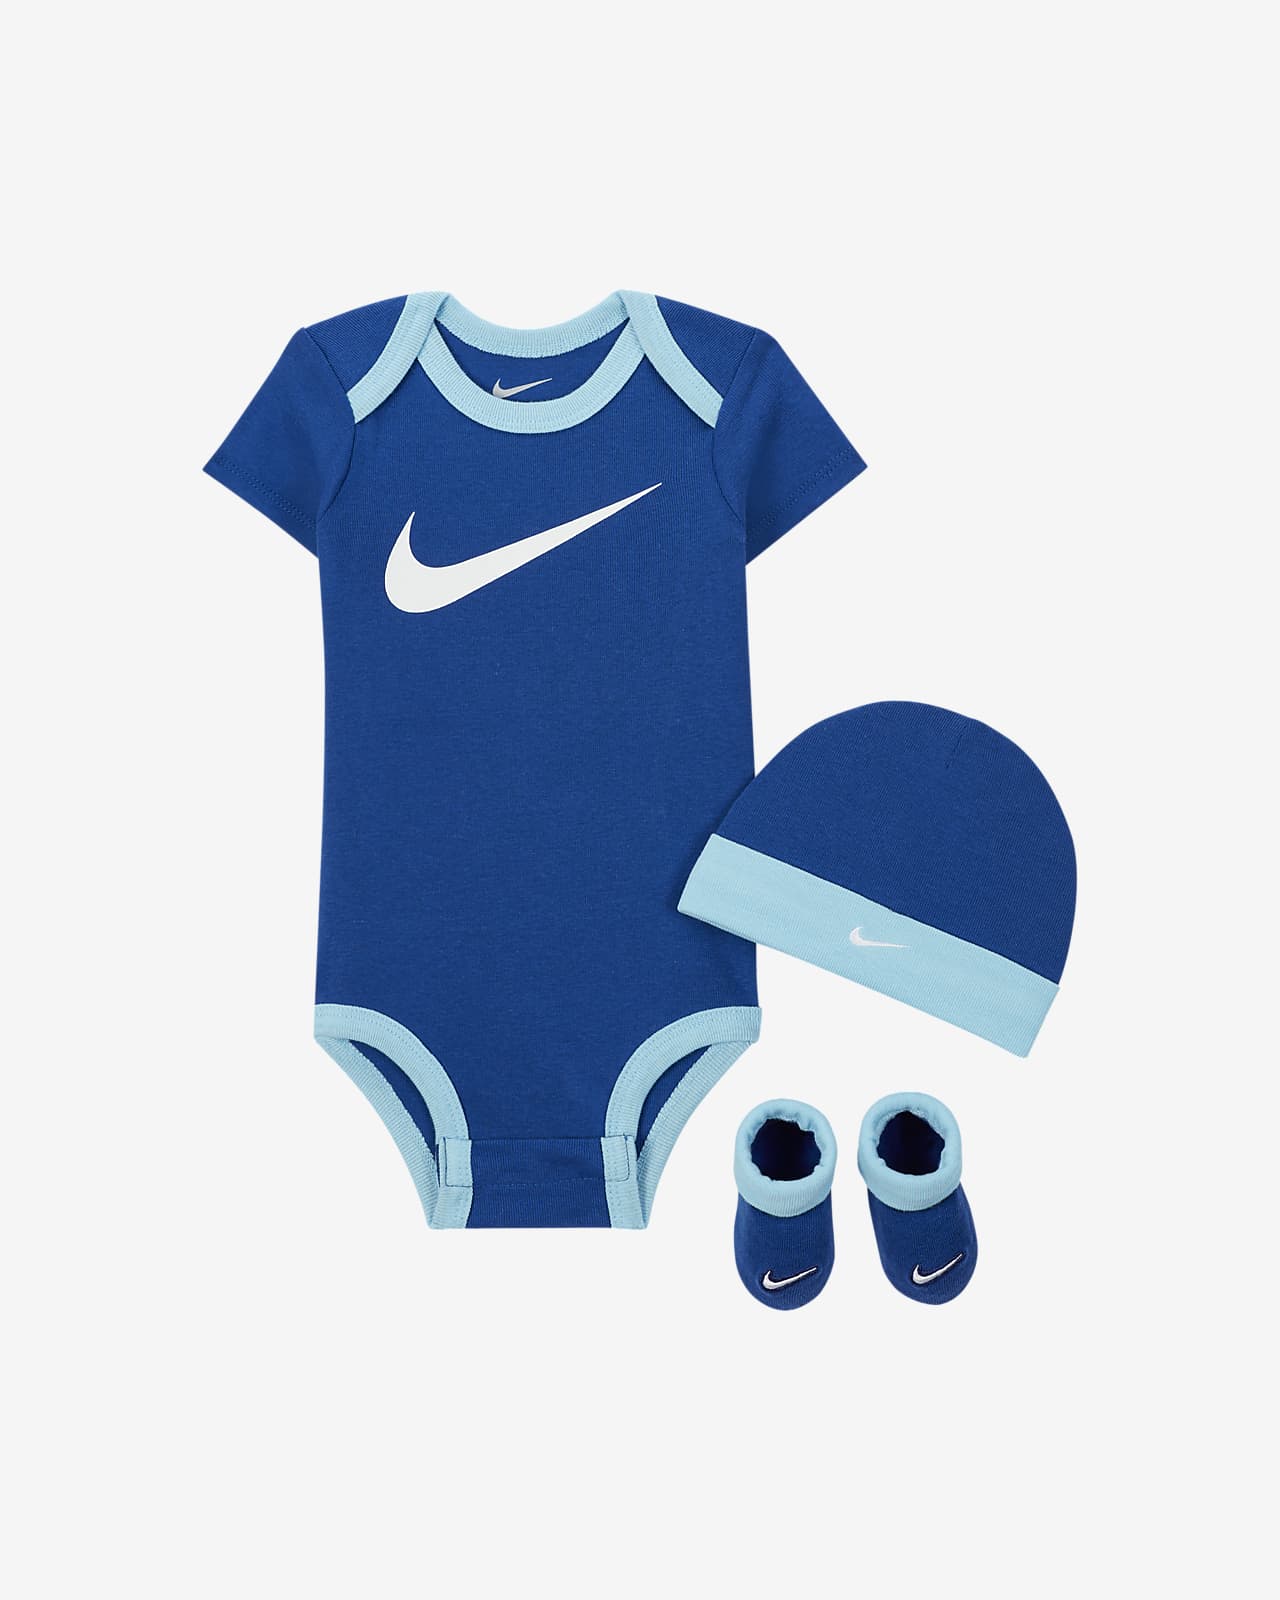 Nike Baby (6-12M) Bodysuit, Hat and 